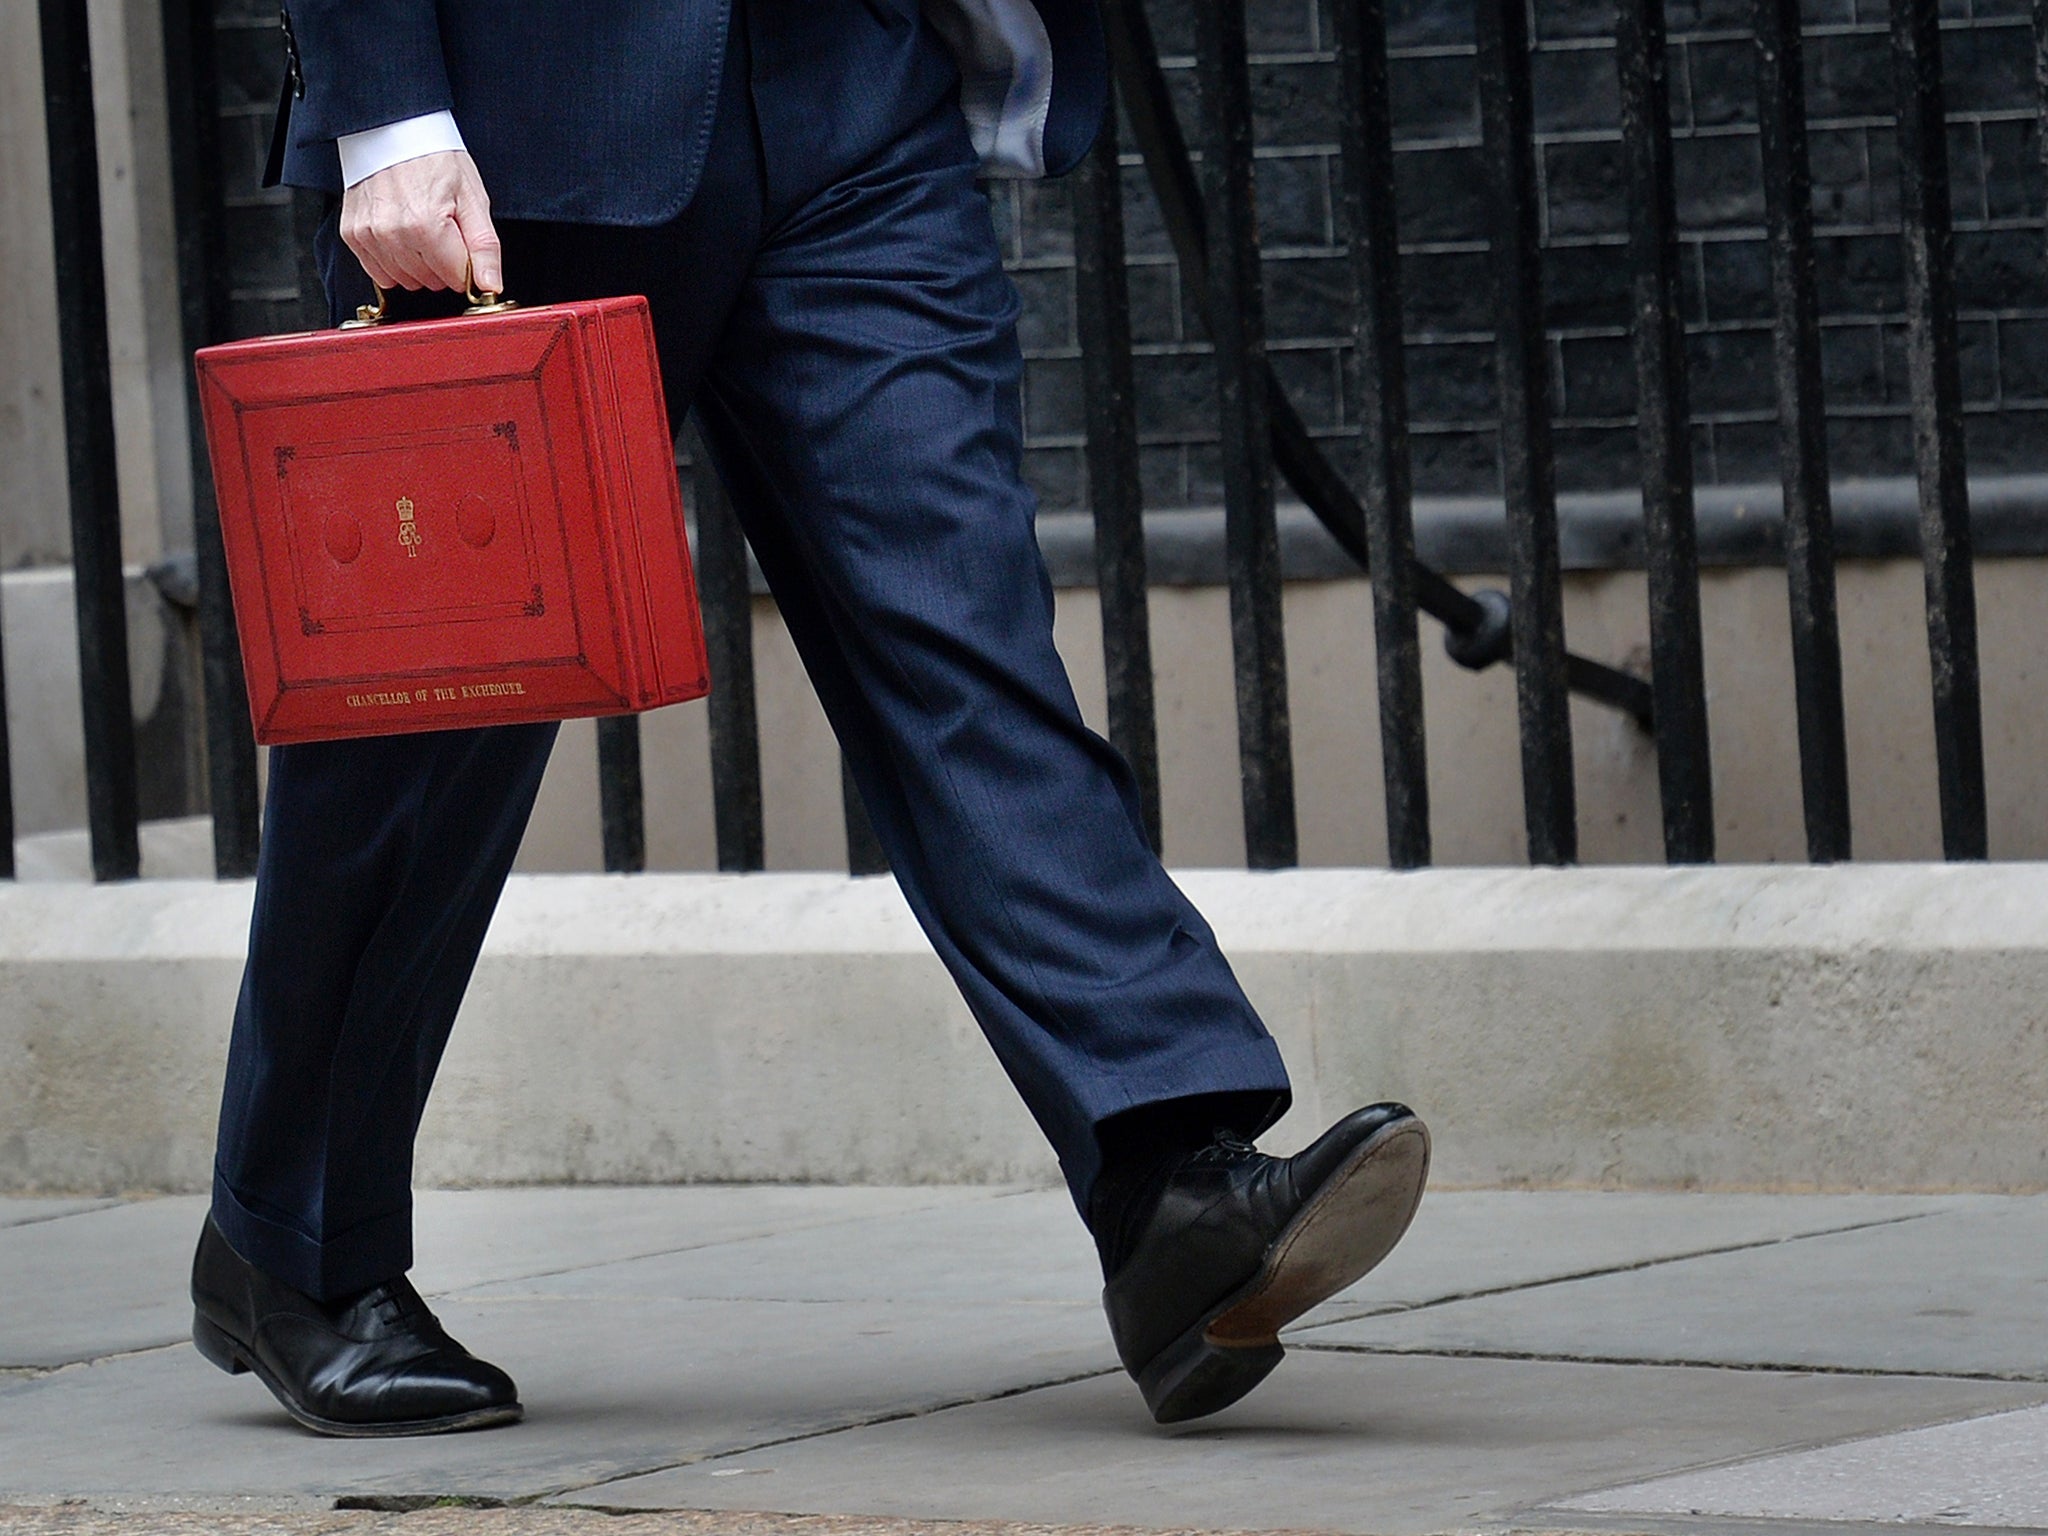 The IFS has calculated that Govenment departments are facing average budget cuts of 27 per cent in the next five years